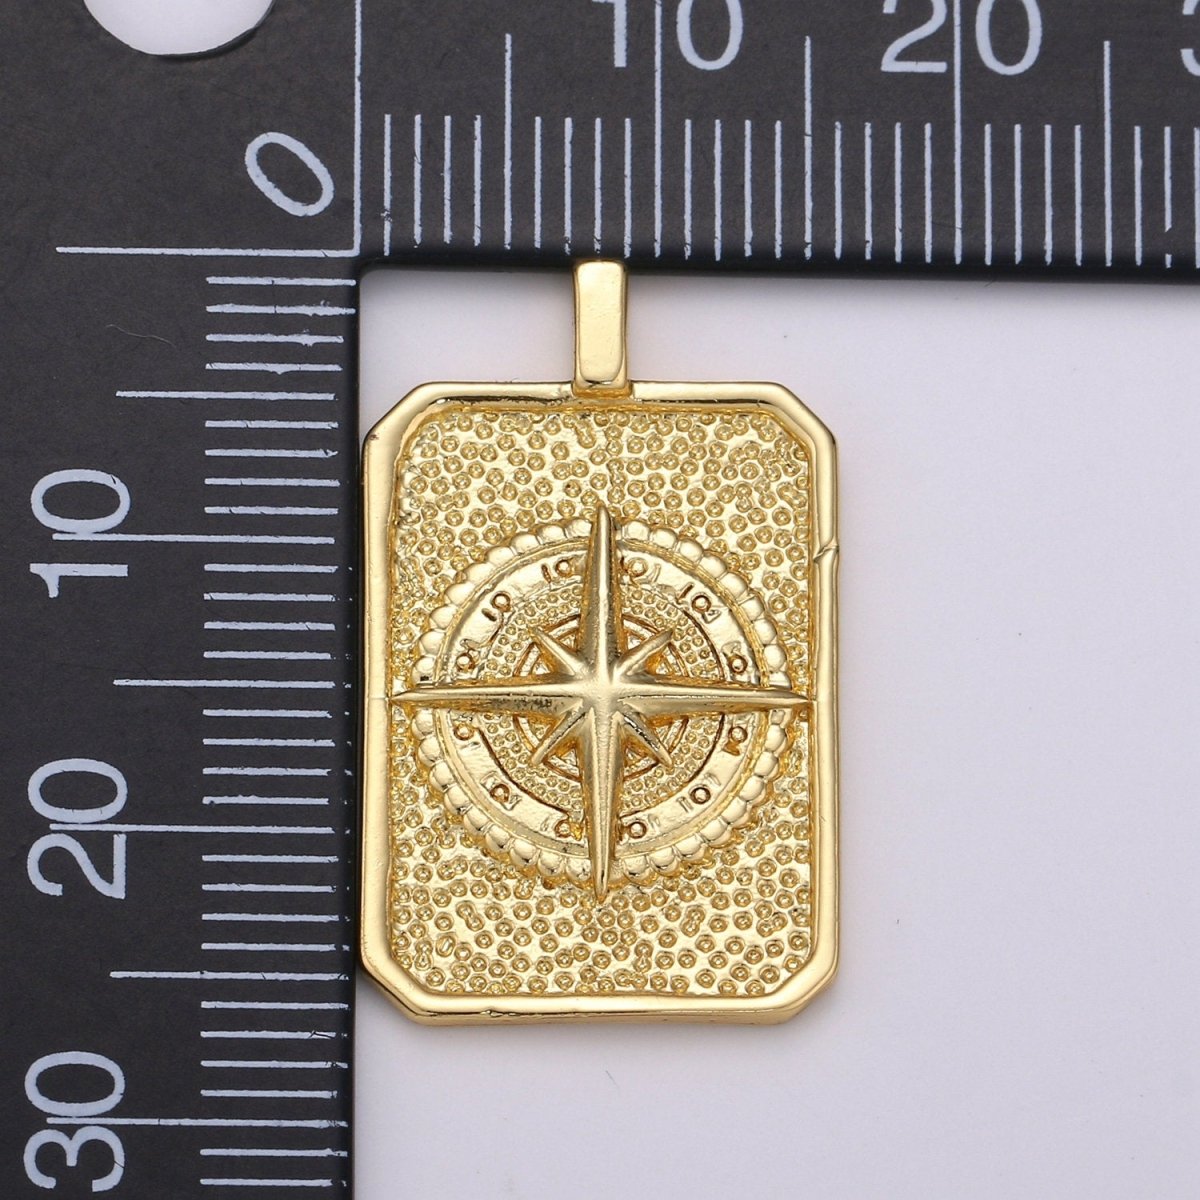 Tag Charm 14k Gold Filled coin pendant, Medallion charms,Compass charms, Vintage Military Tag Charm for Necklace Bracelet Earring I-675 - DLUXCA